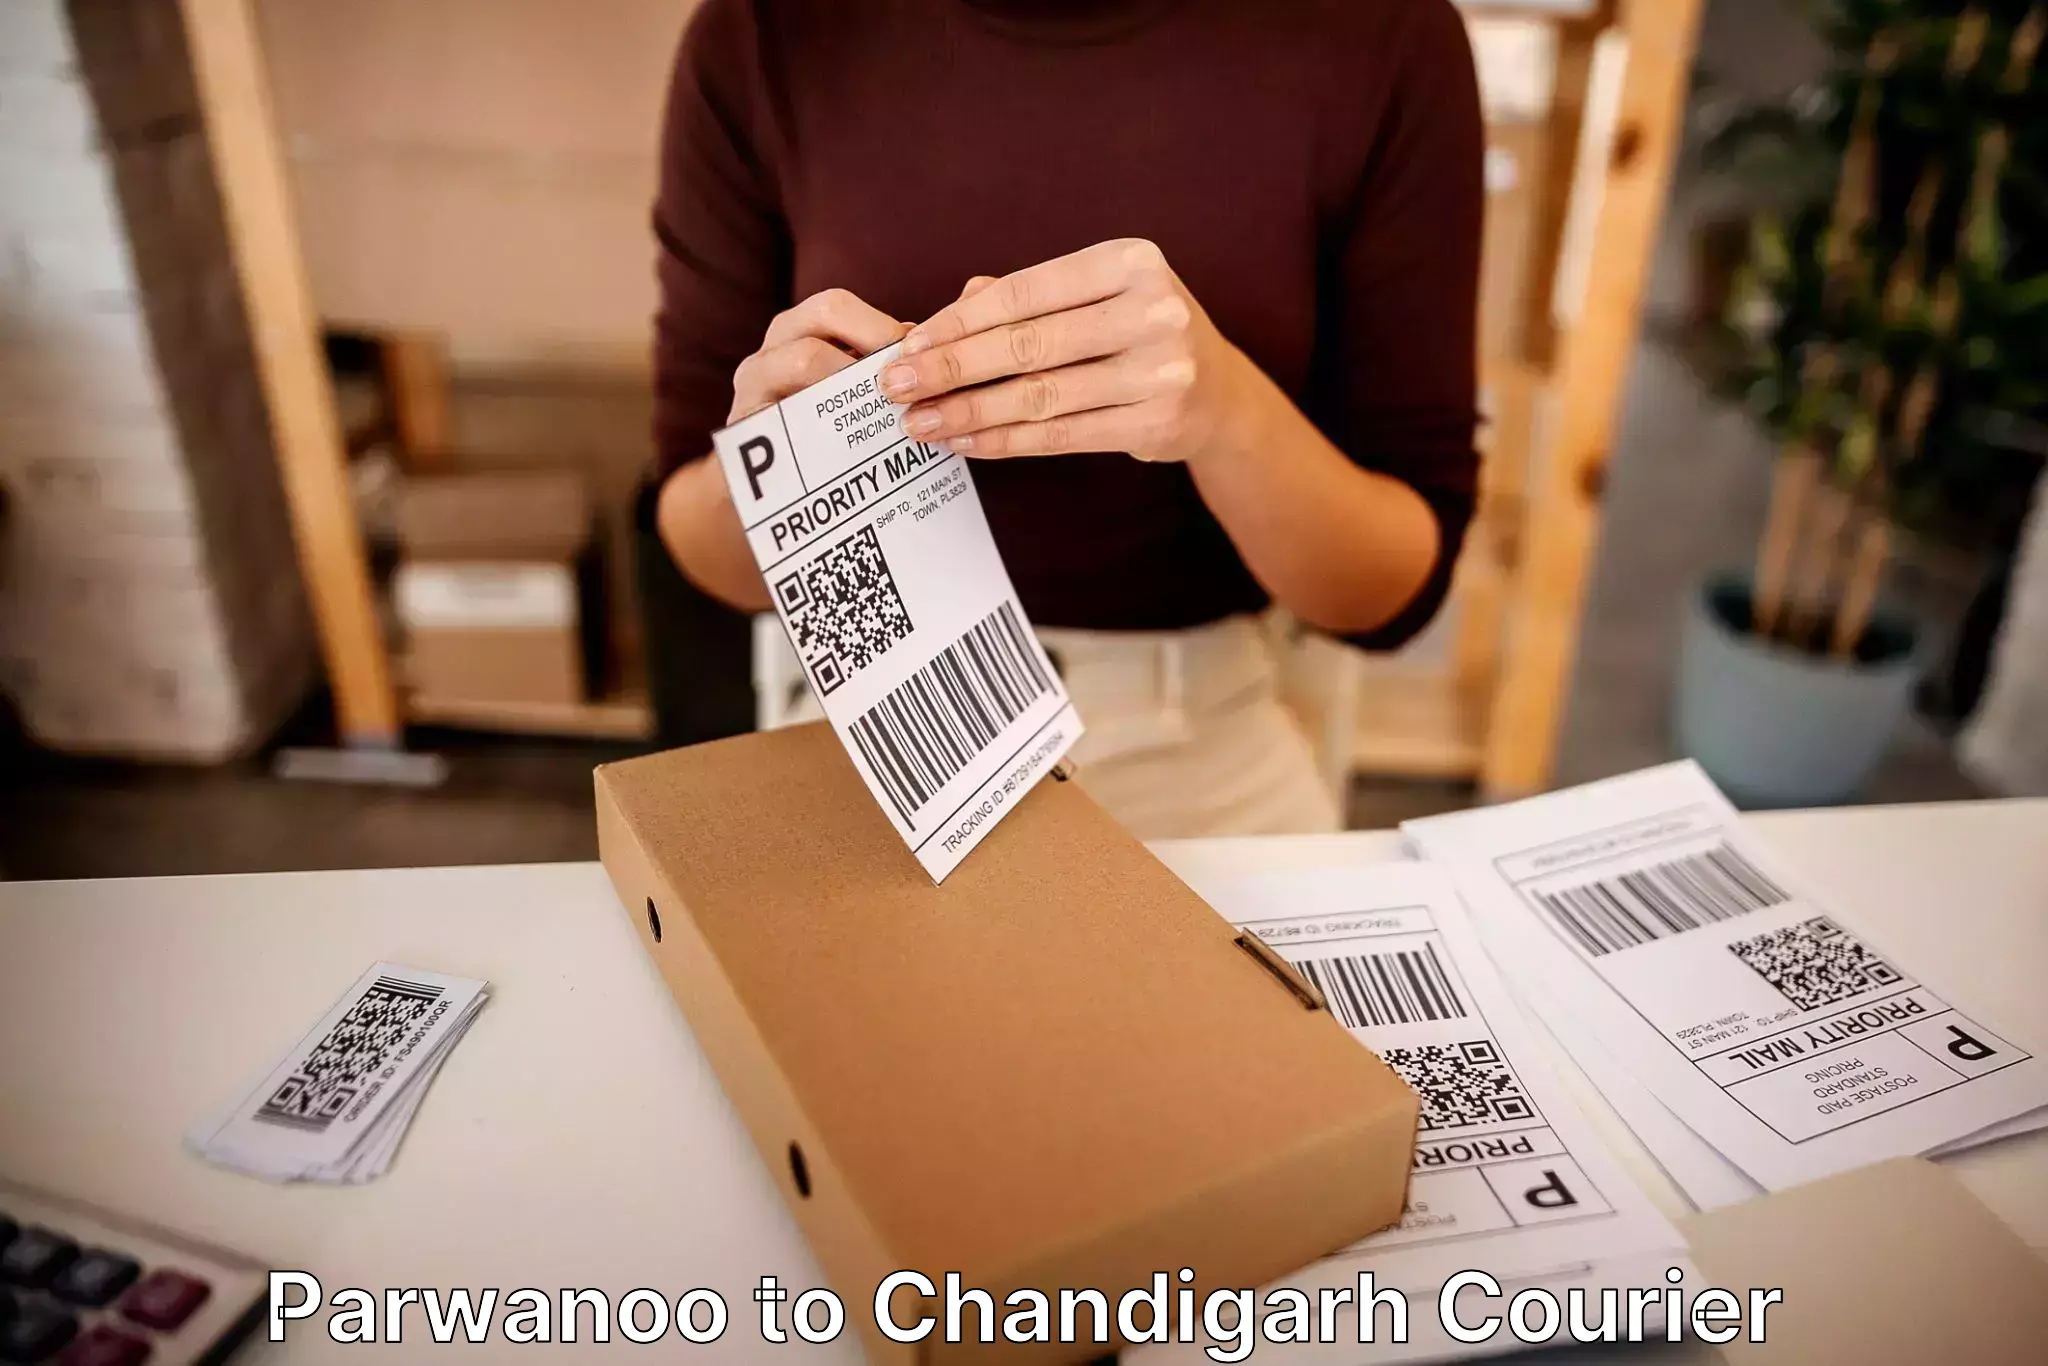 Furniture delivery service Parwanoo to Chandigarh